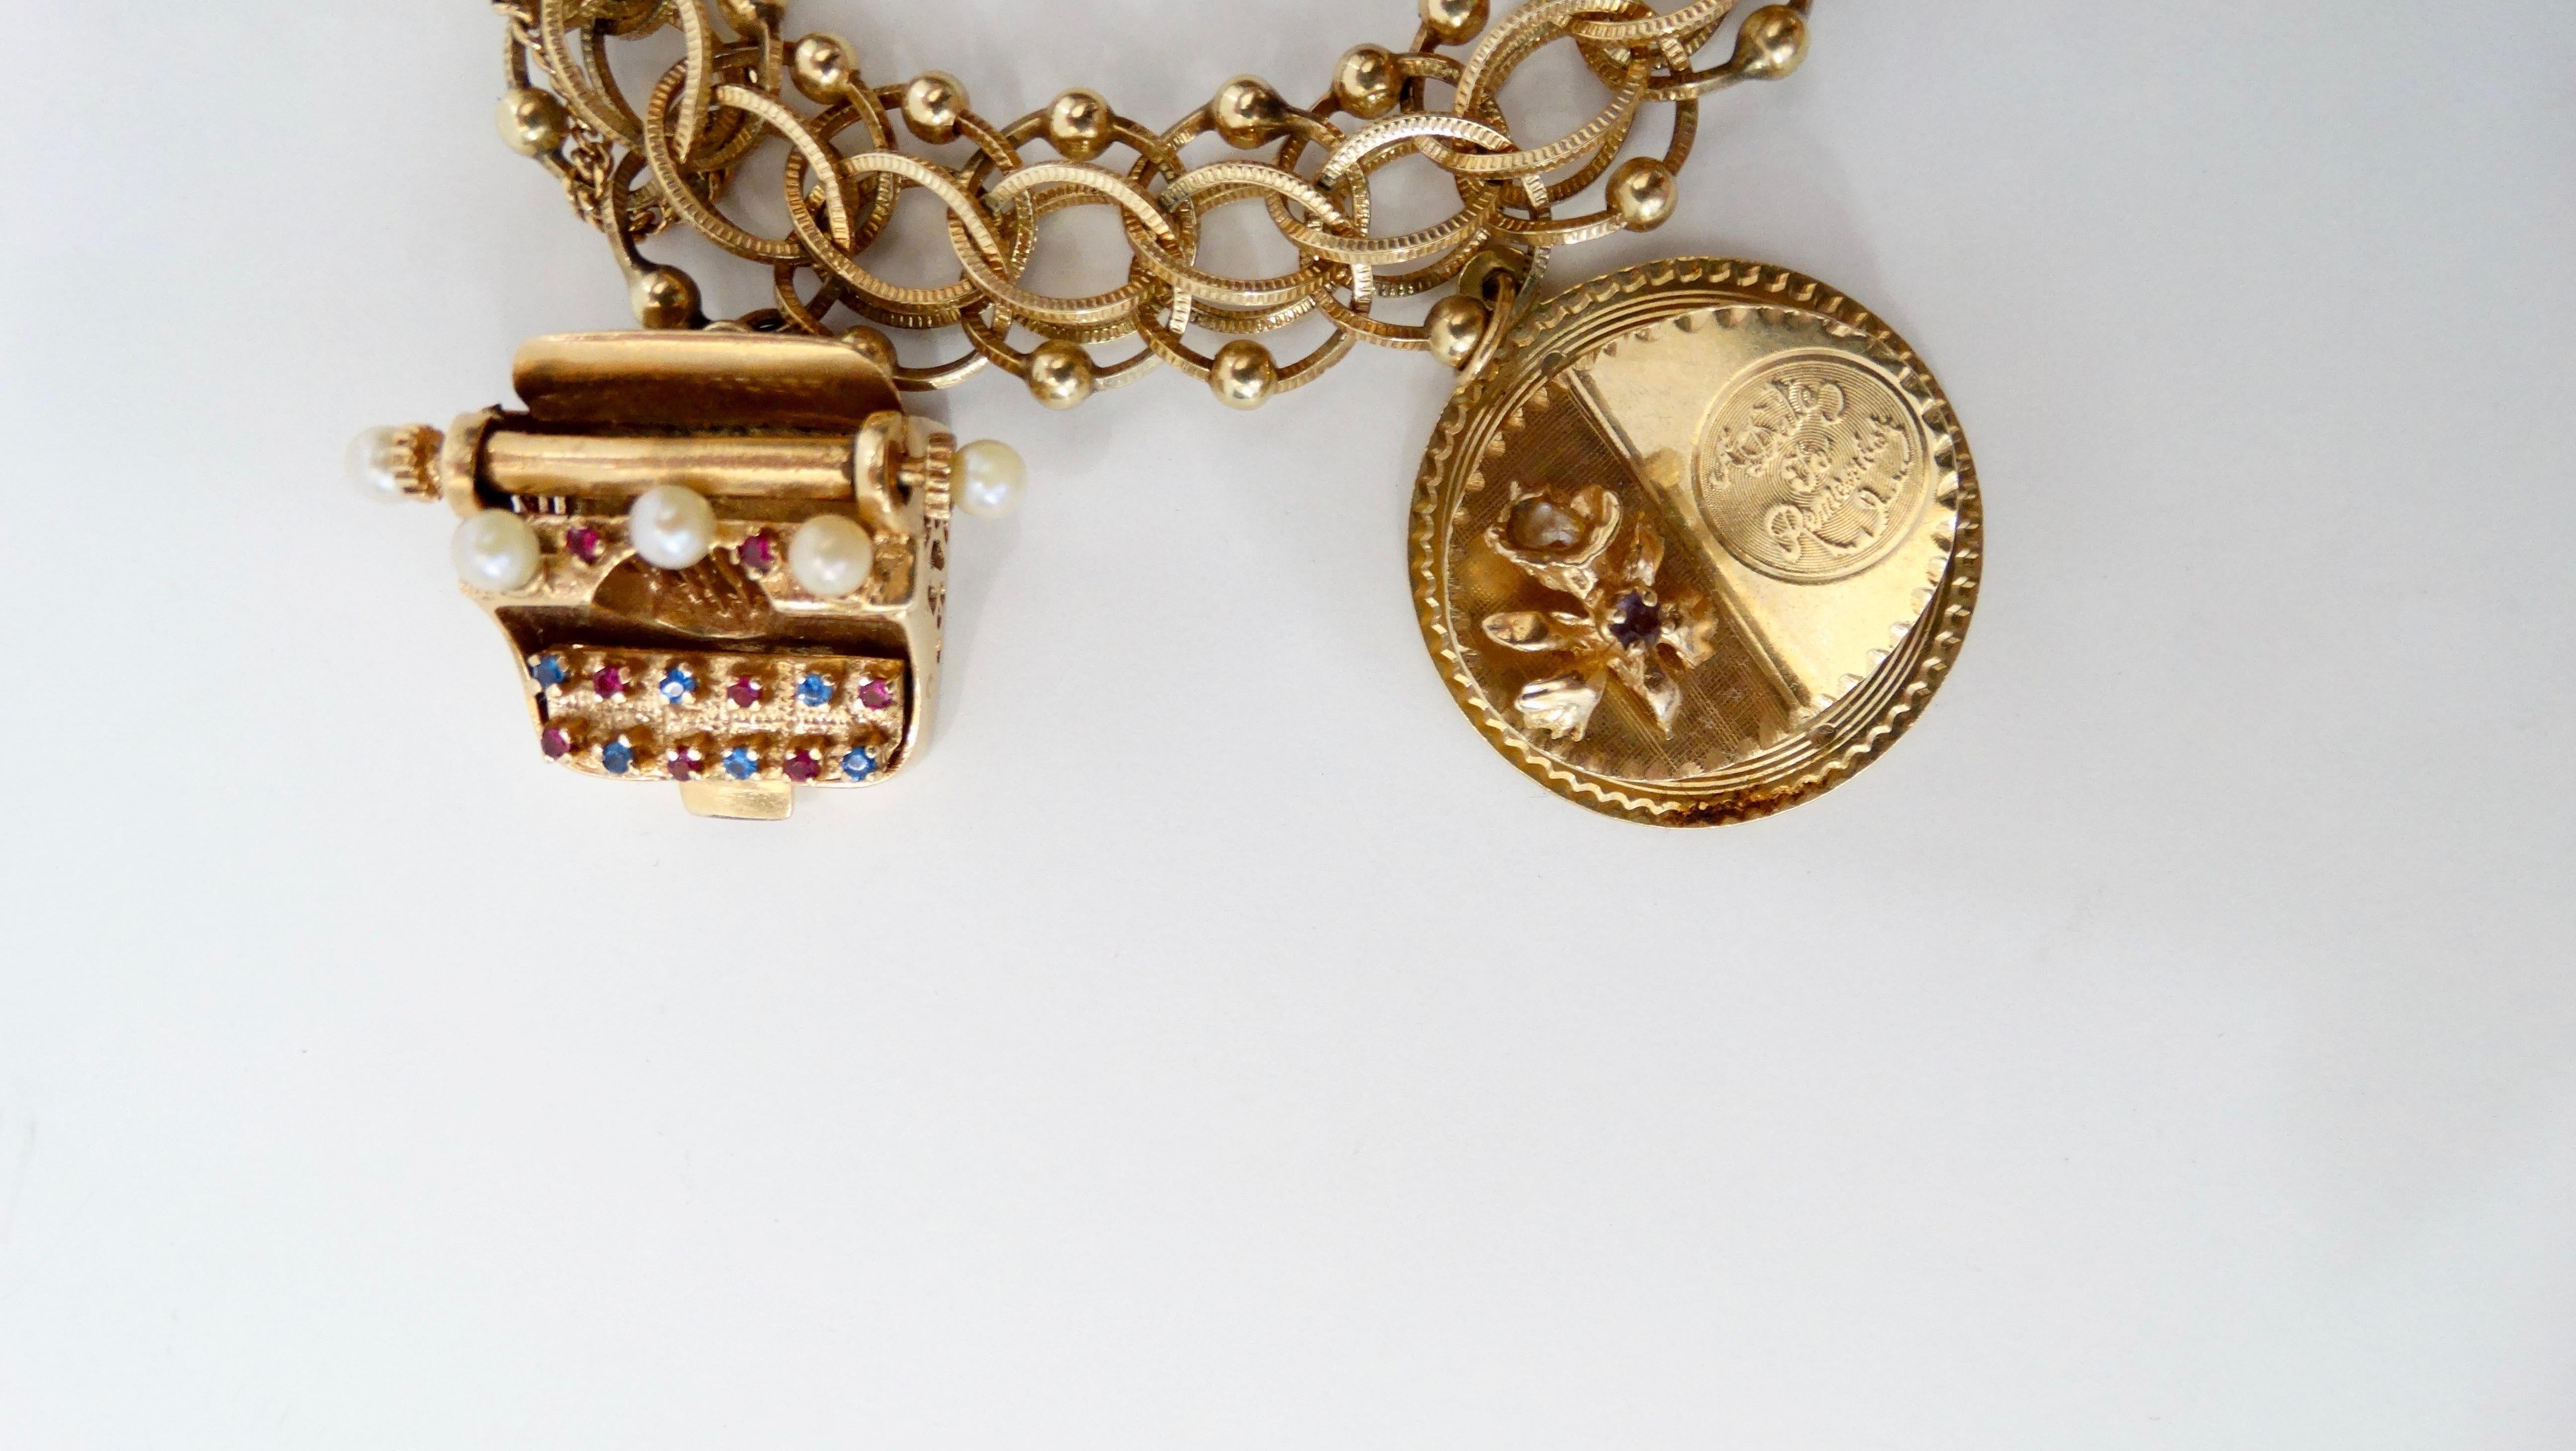 Gorgeous 14k Gold charm bracelet from 1959. Bracelet features a variety of five 14k Gold charms encrusted with pearls, ruby, emerald, amethyst and sapphire including a type writer, Merry Christmas charm, and Cherub Angel. Bracelet features a